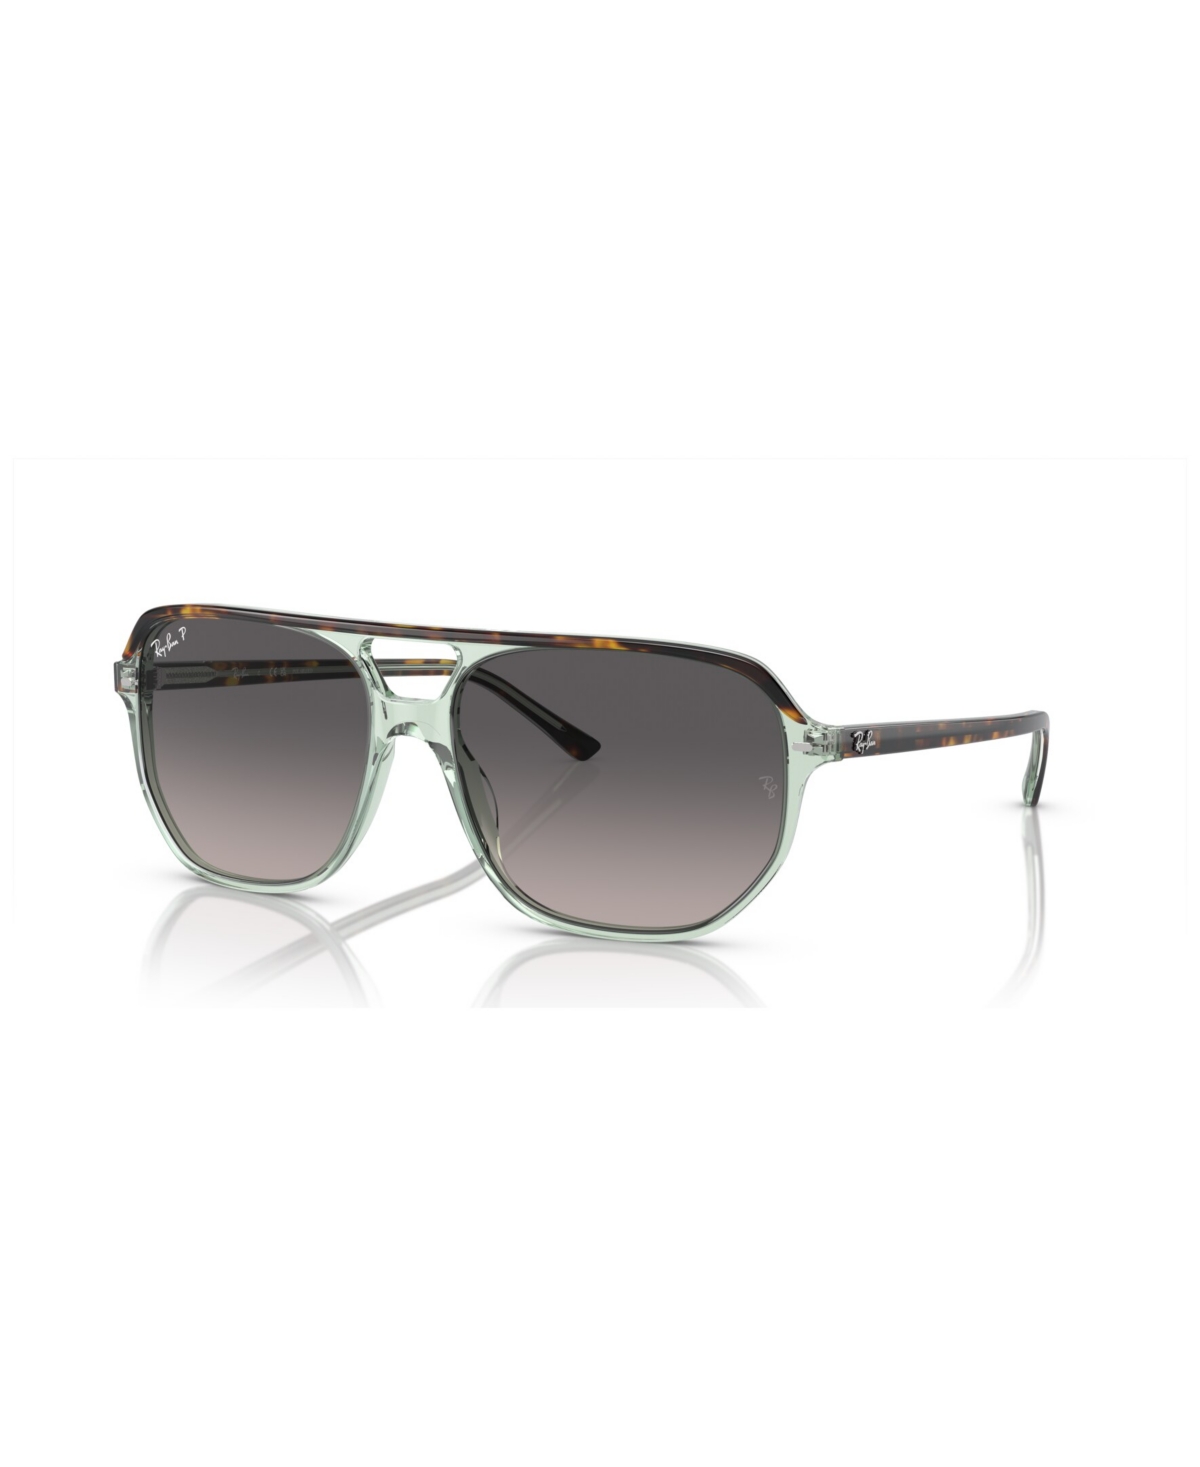 Ray Ban Unisex Bill One Polarized Sunglasses, Gradient Rb2205 In Havana On Transparent Green